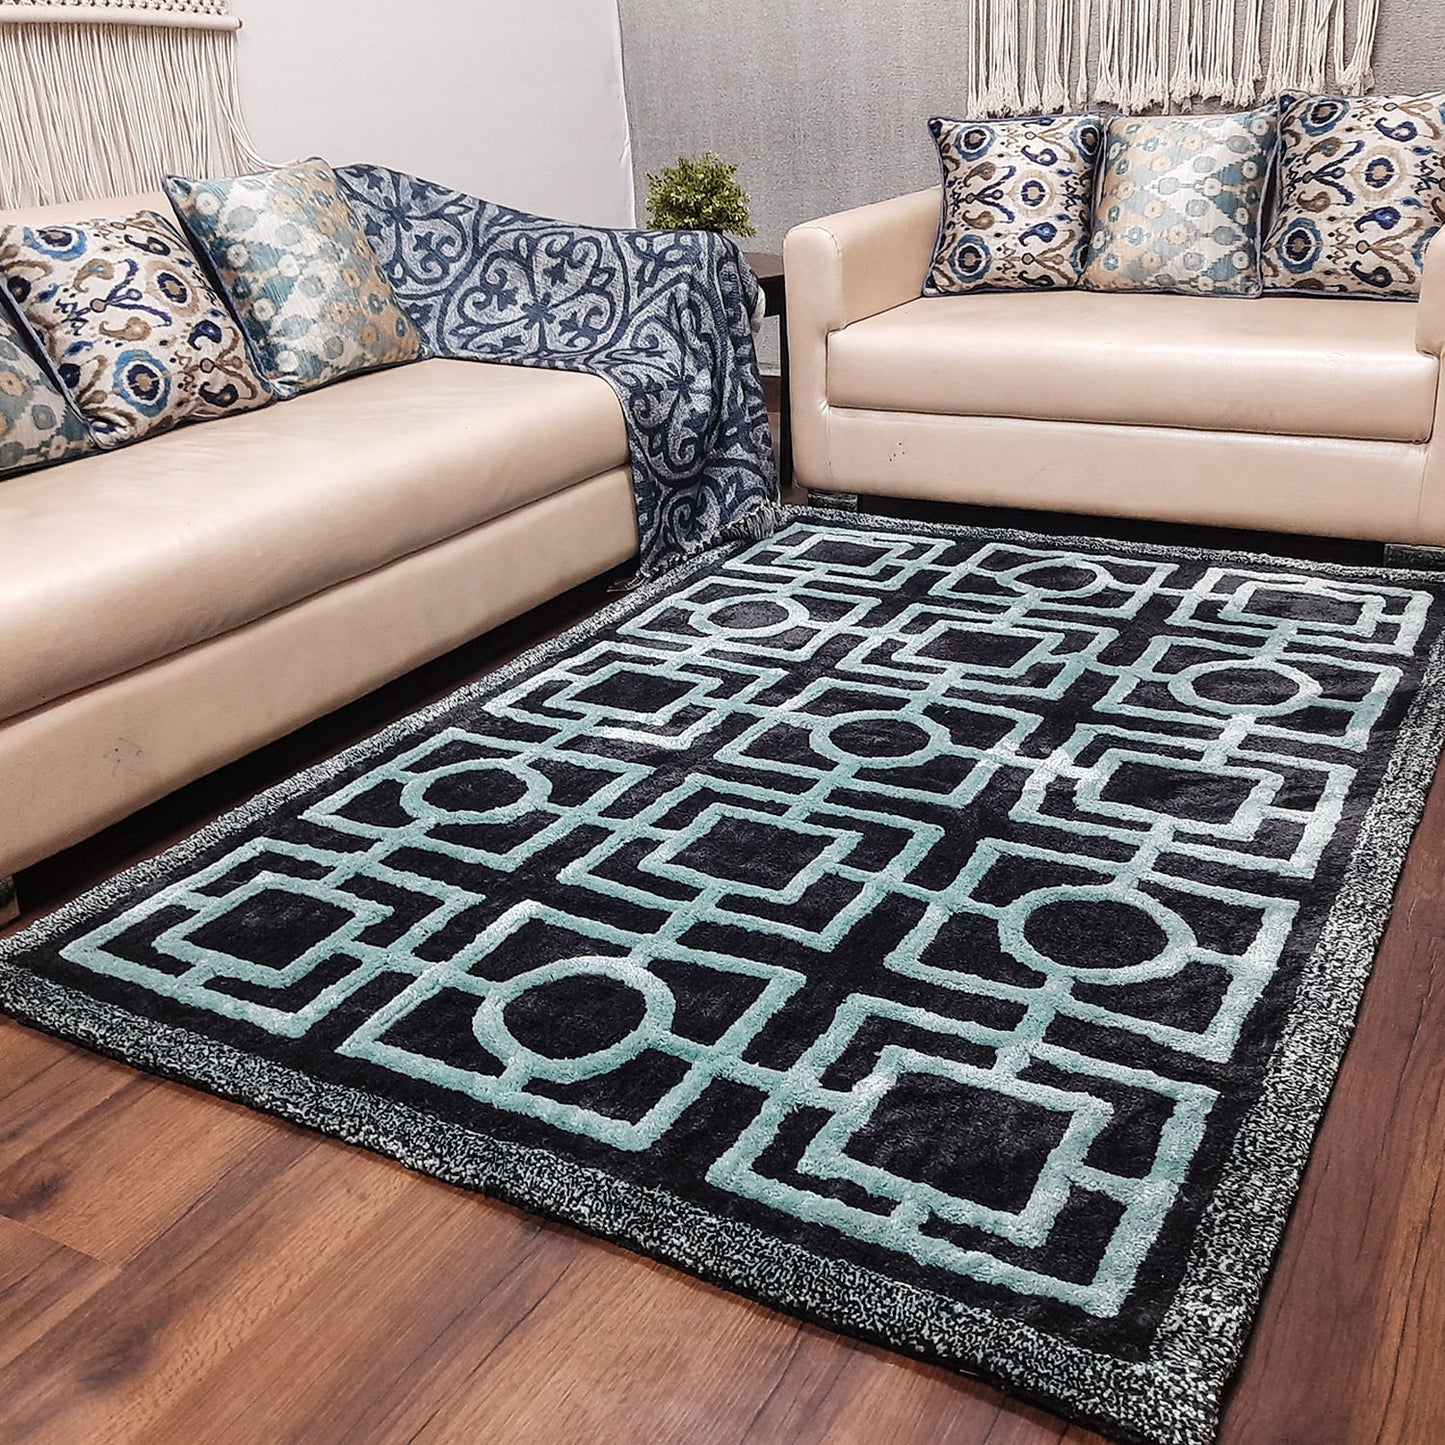 Avioni Modern Collection- Micro Black & Grey With Geometric Design Tufted Carpet-Different Sizes Shaggy Fluffy Rugs and Carpet for Living Room